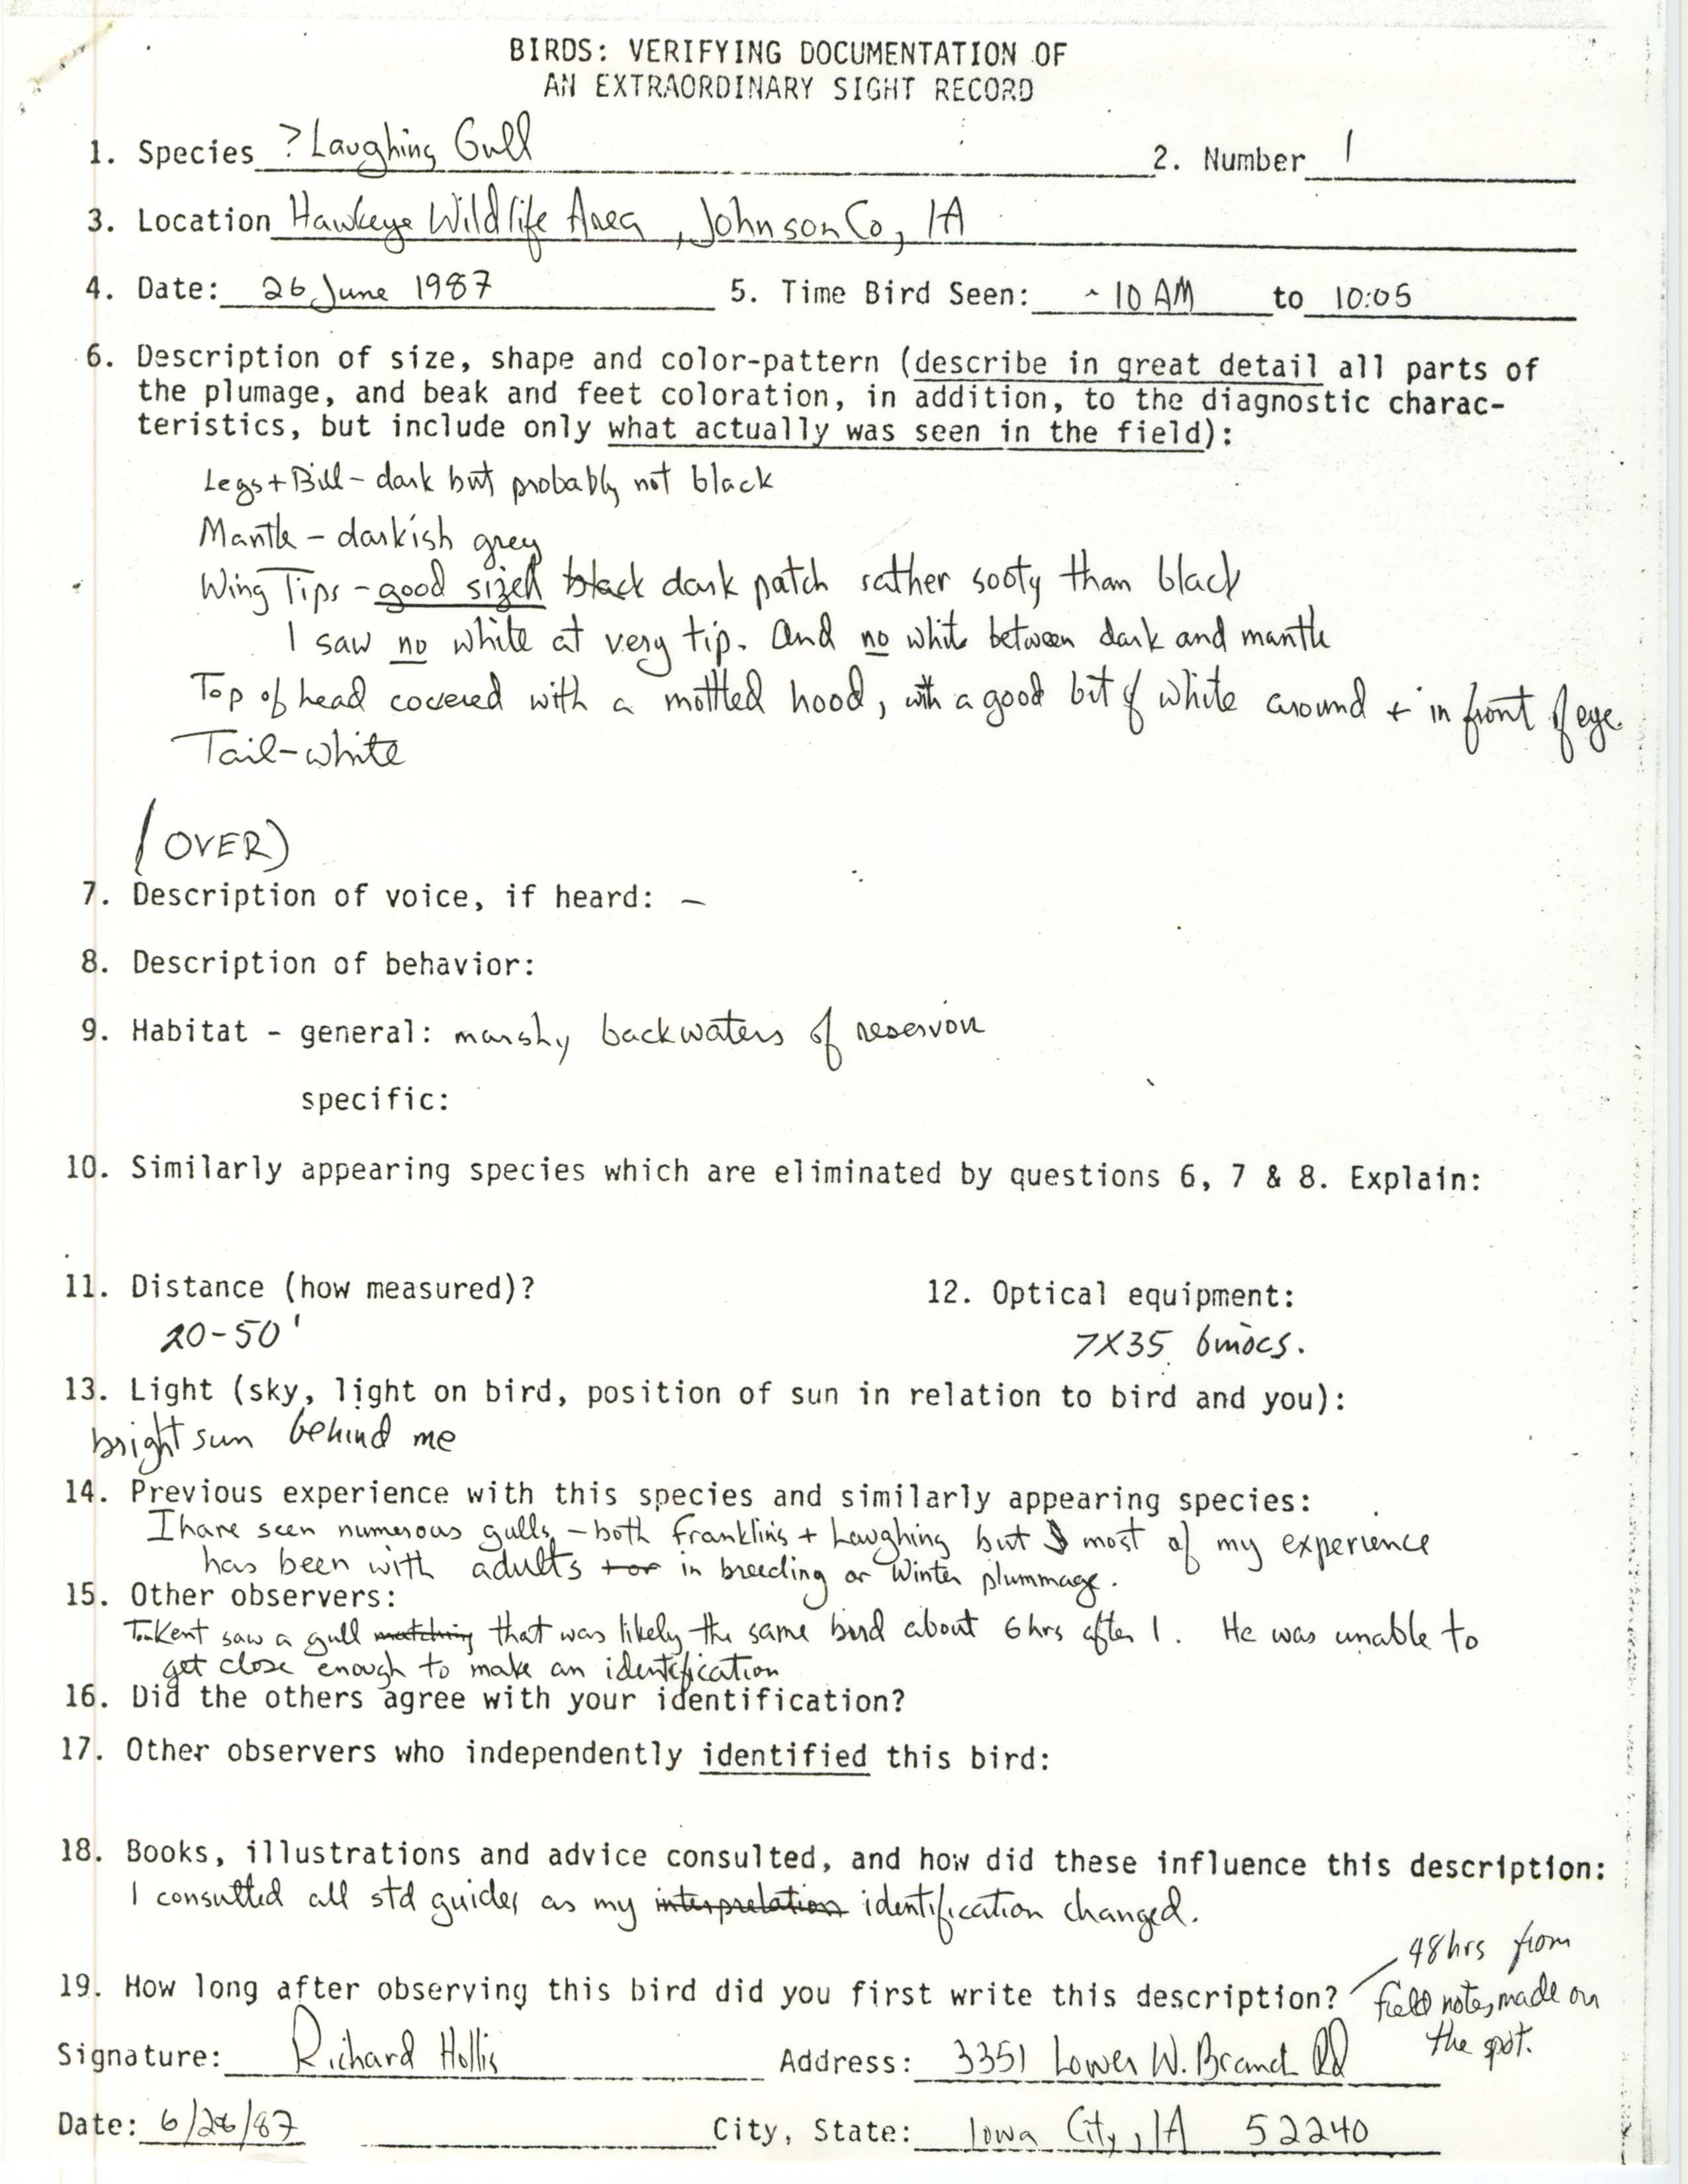 Birds: verifying documentation of an extraordinary sight record submitted by Richard Hollis, June 26, 1987